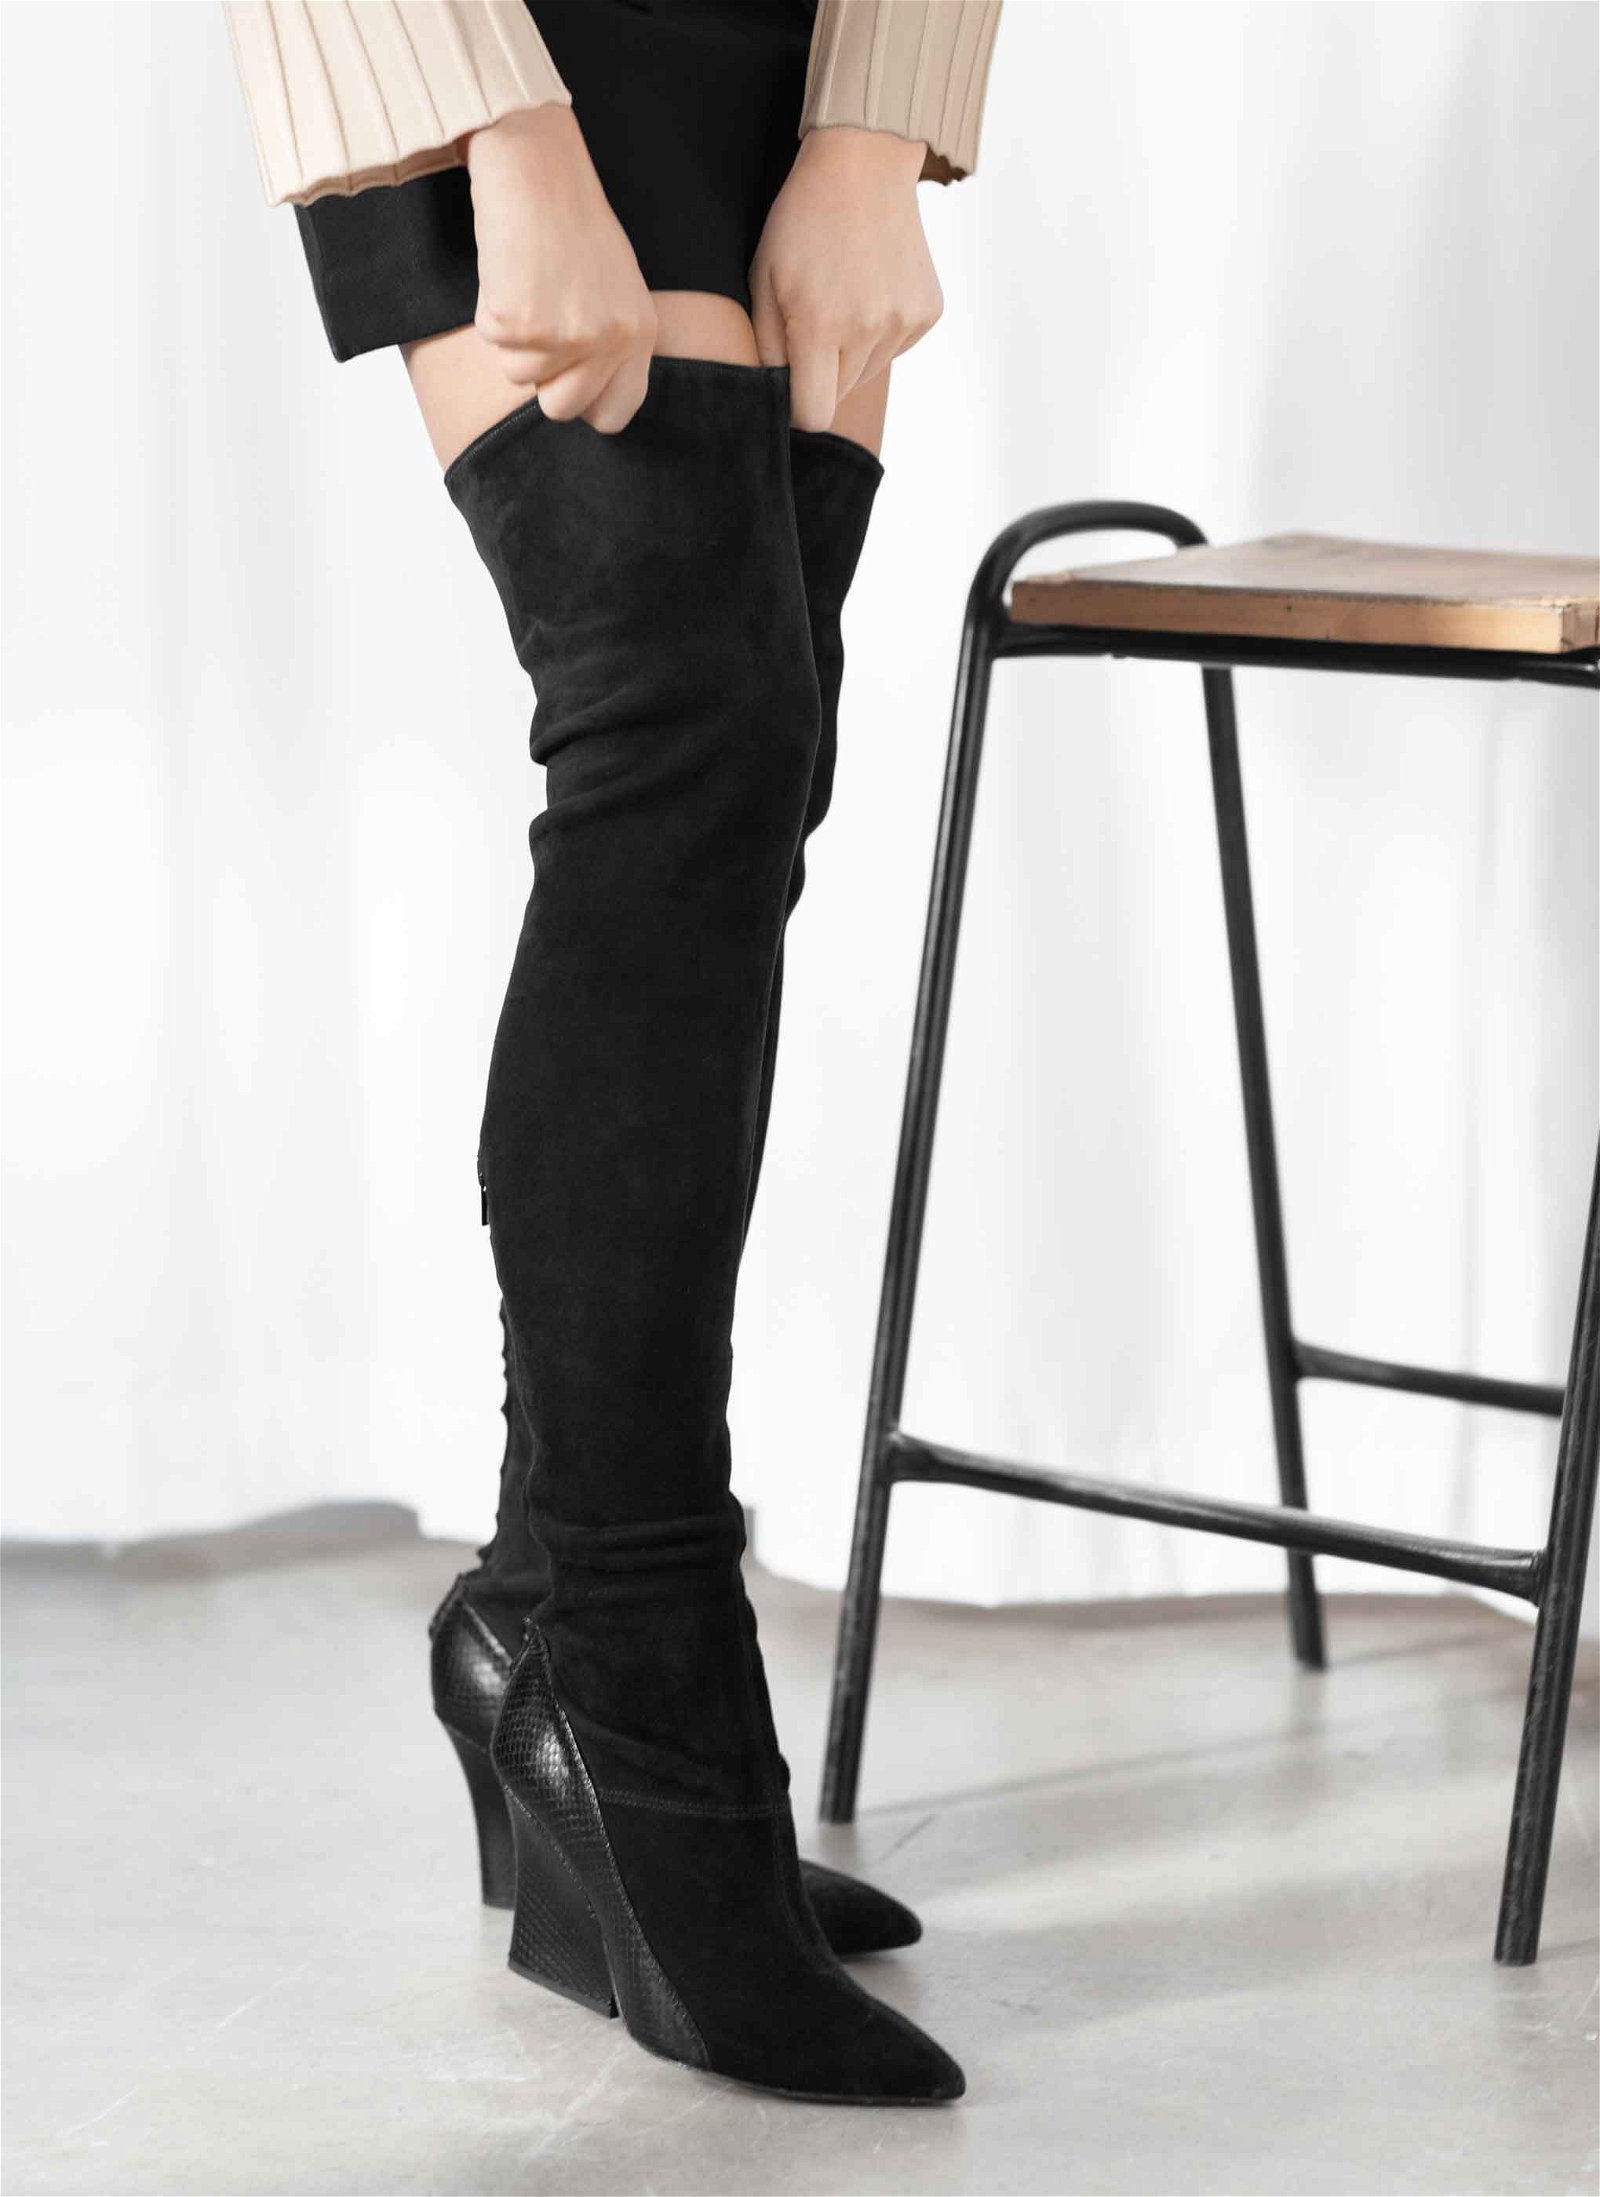 & other stories thigh high boots